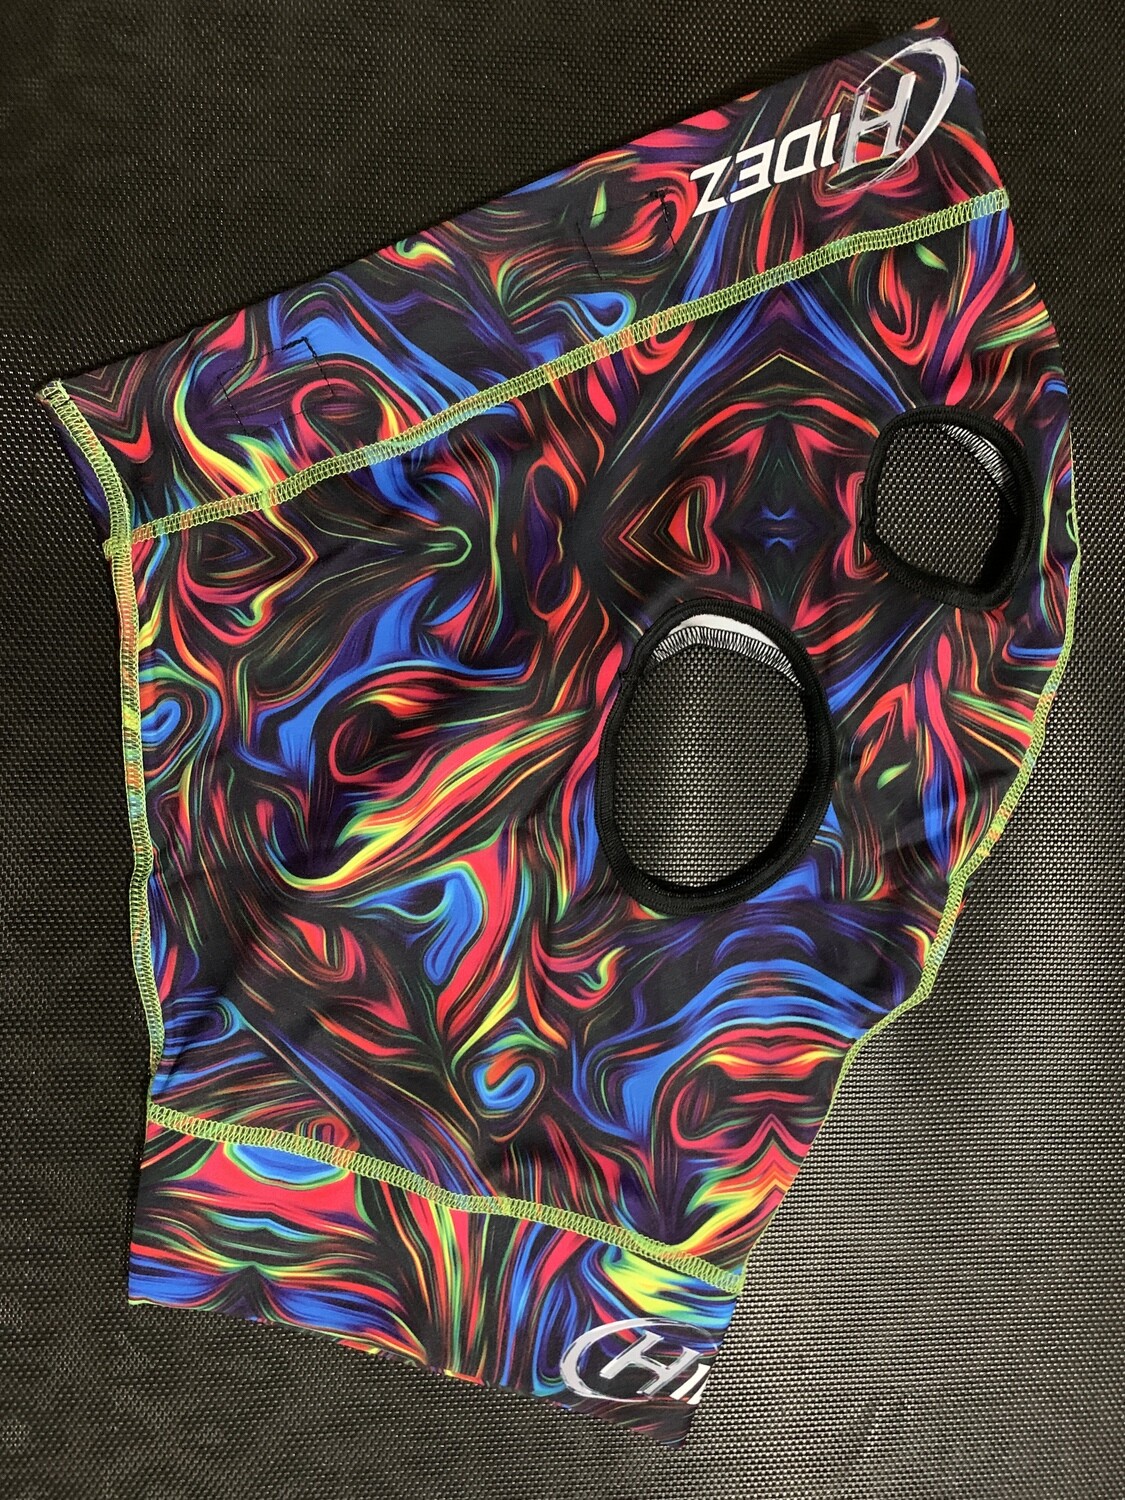 Hidez Printed Mask - small - in-stock “psychedelic ”